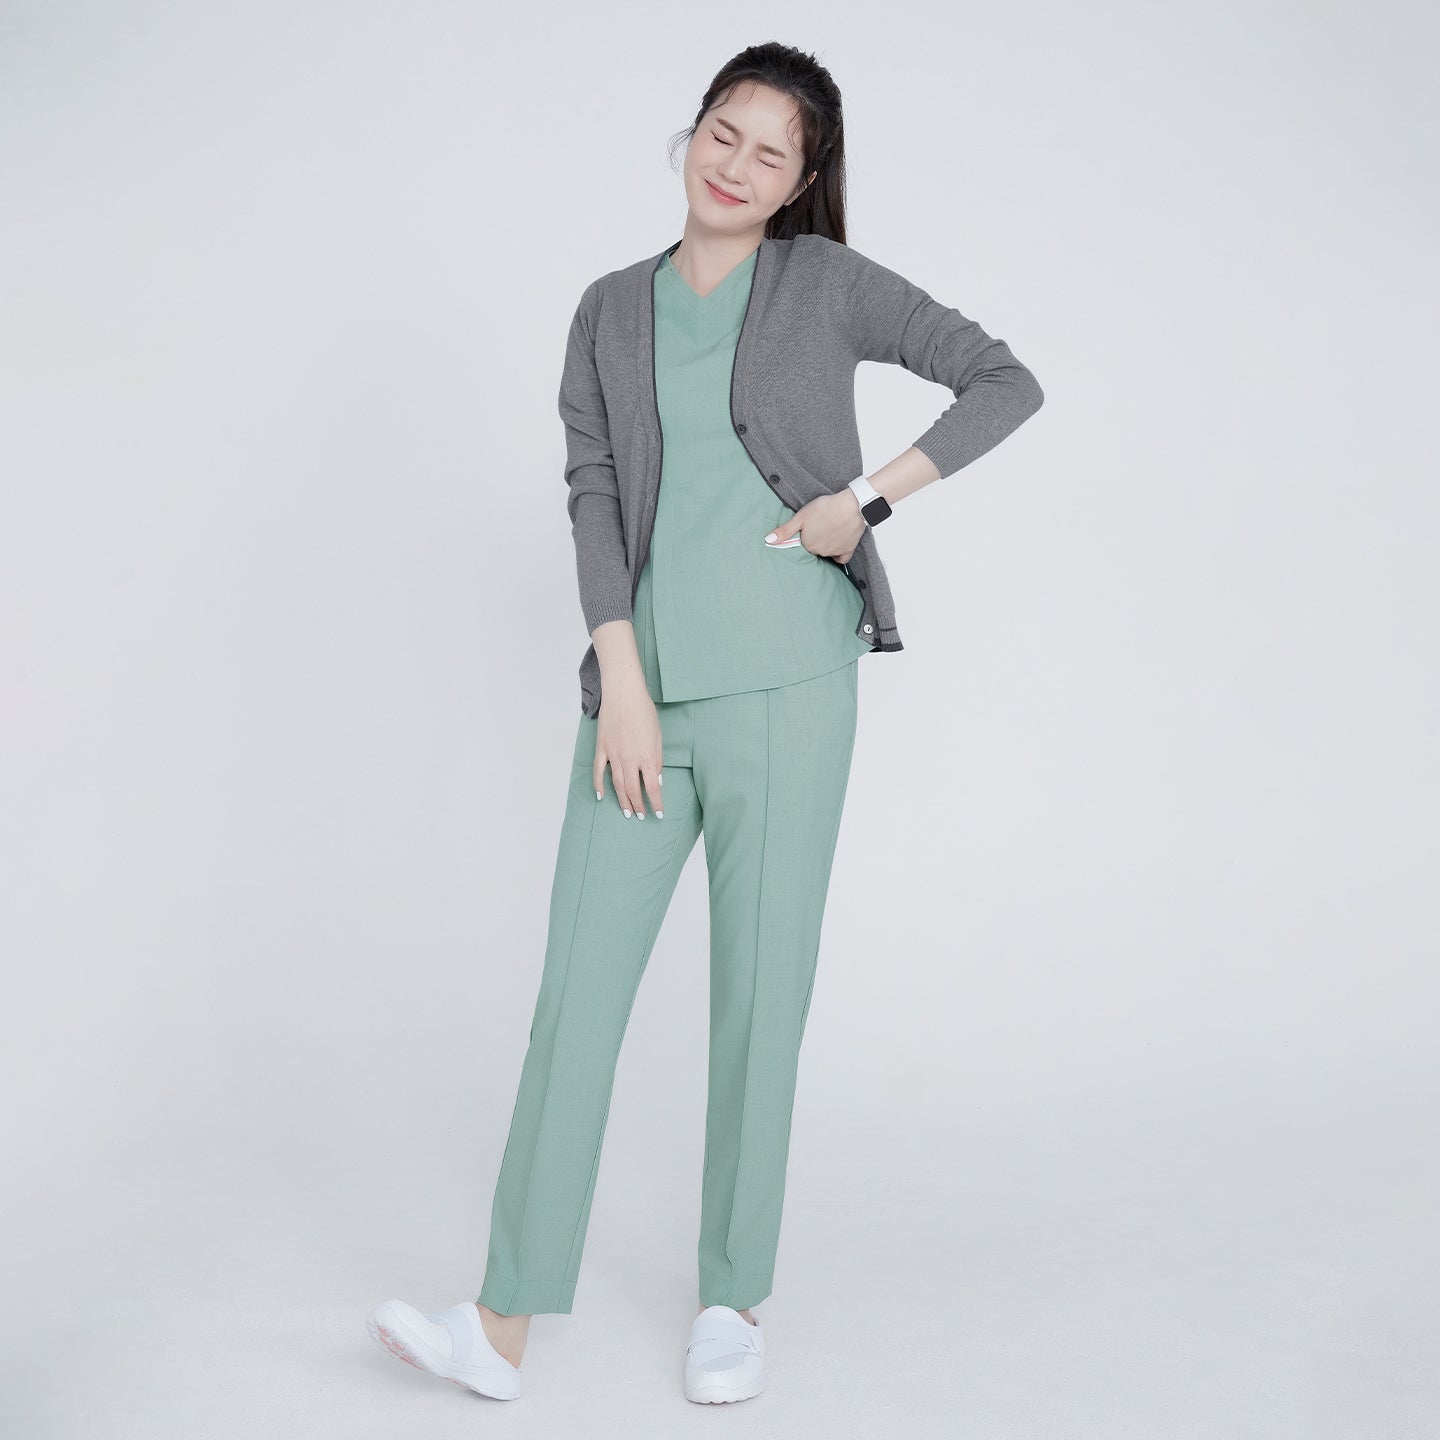 Woman wearing a gray soft touch cardigan over a green top and pants, posing with one hand on her hip and eyes closed,Gray